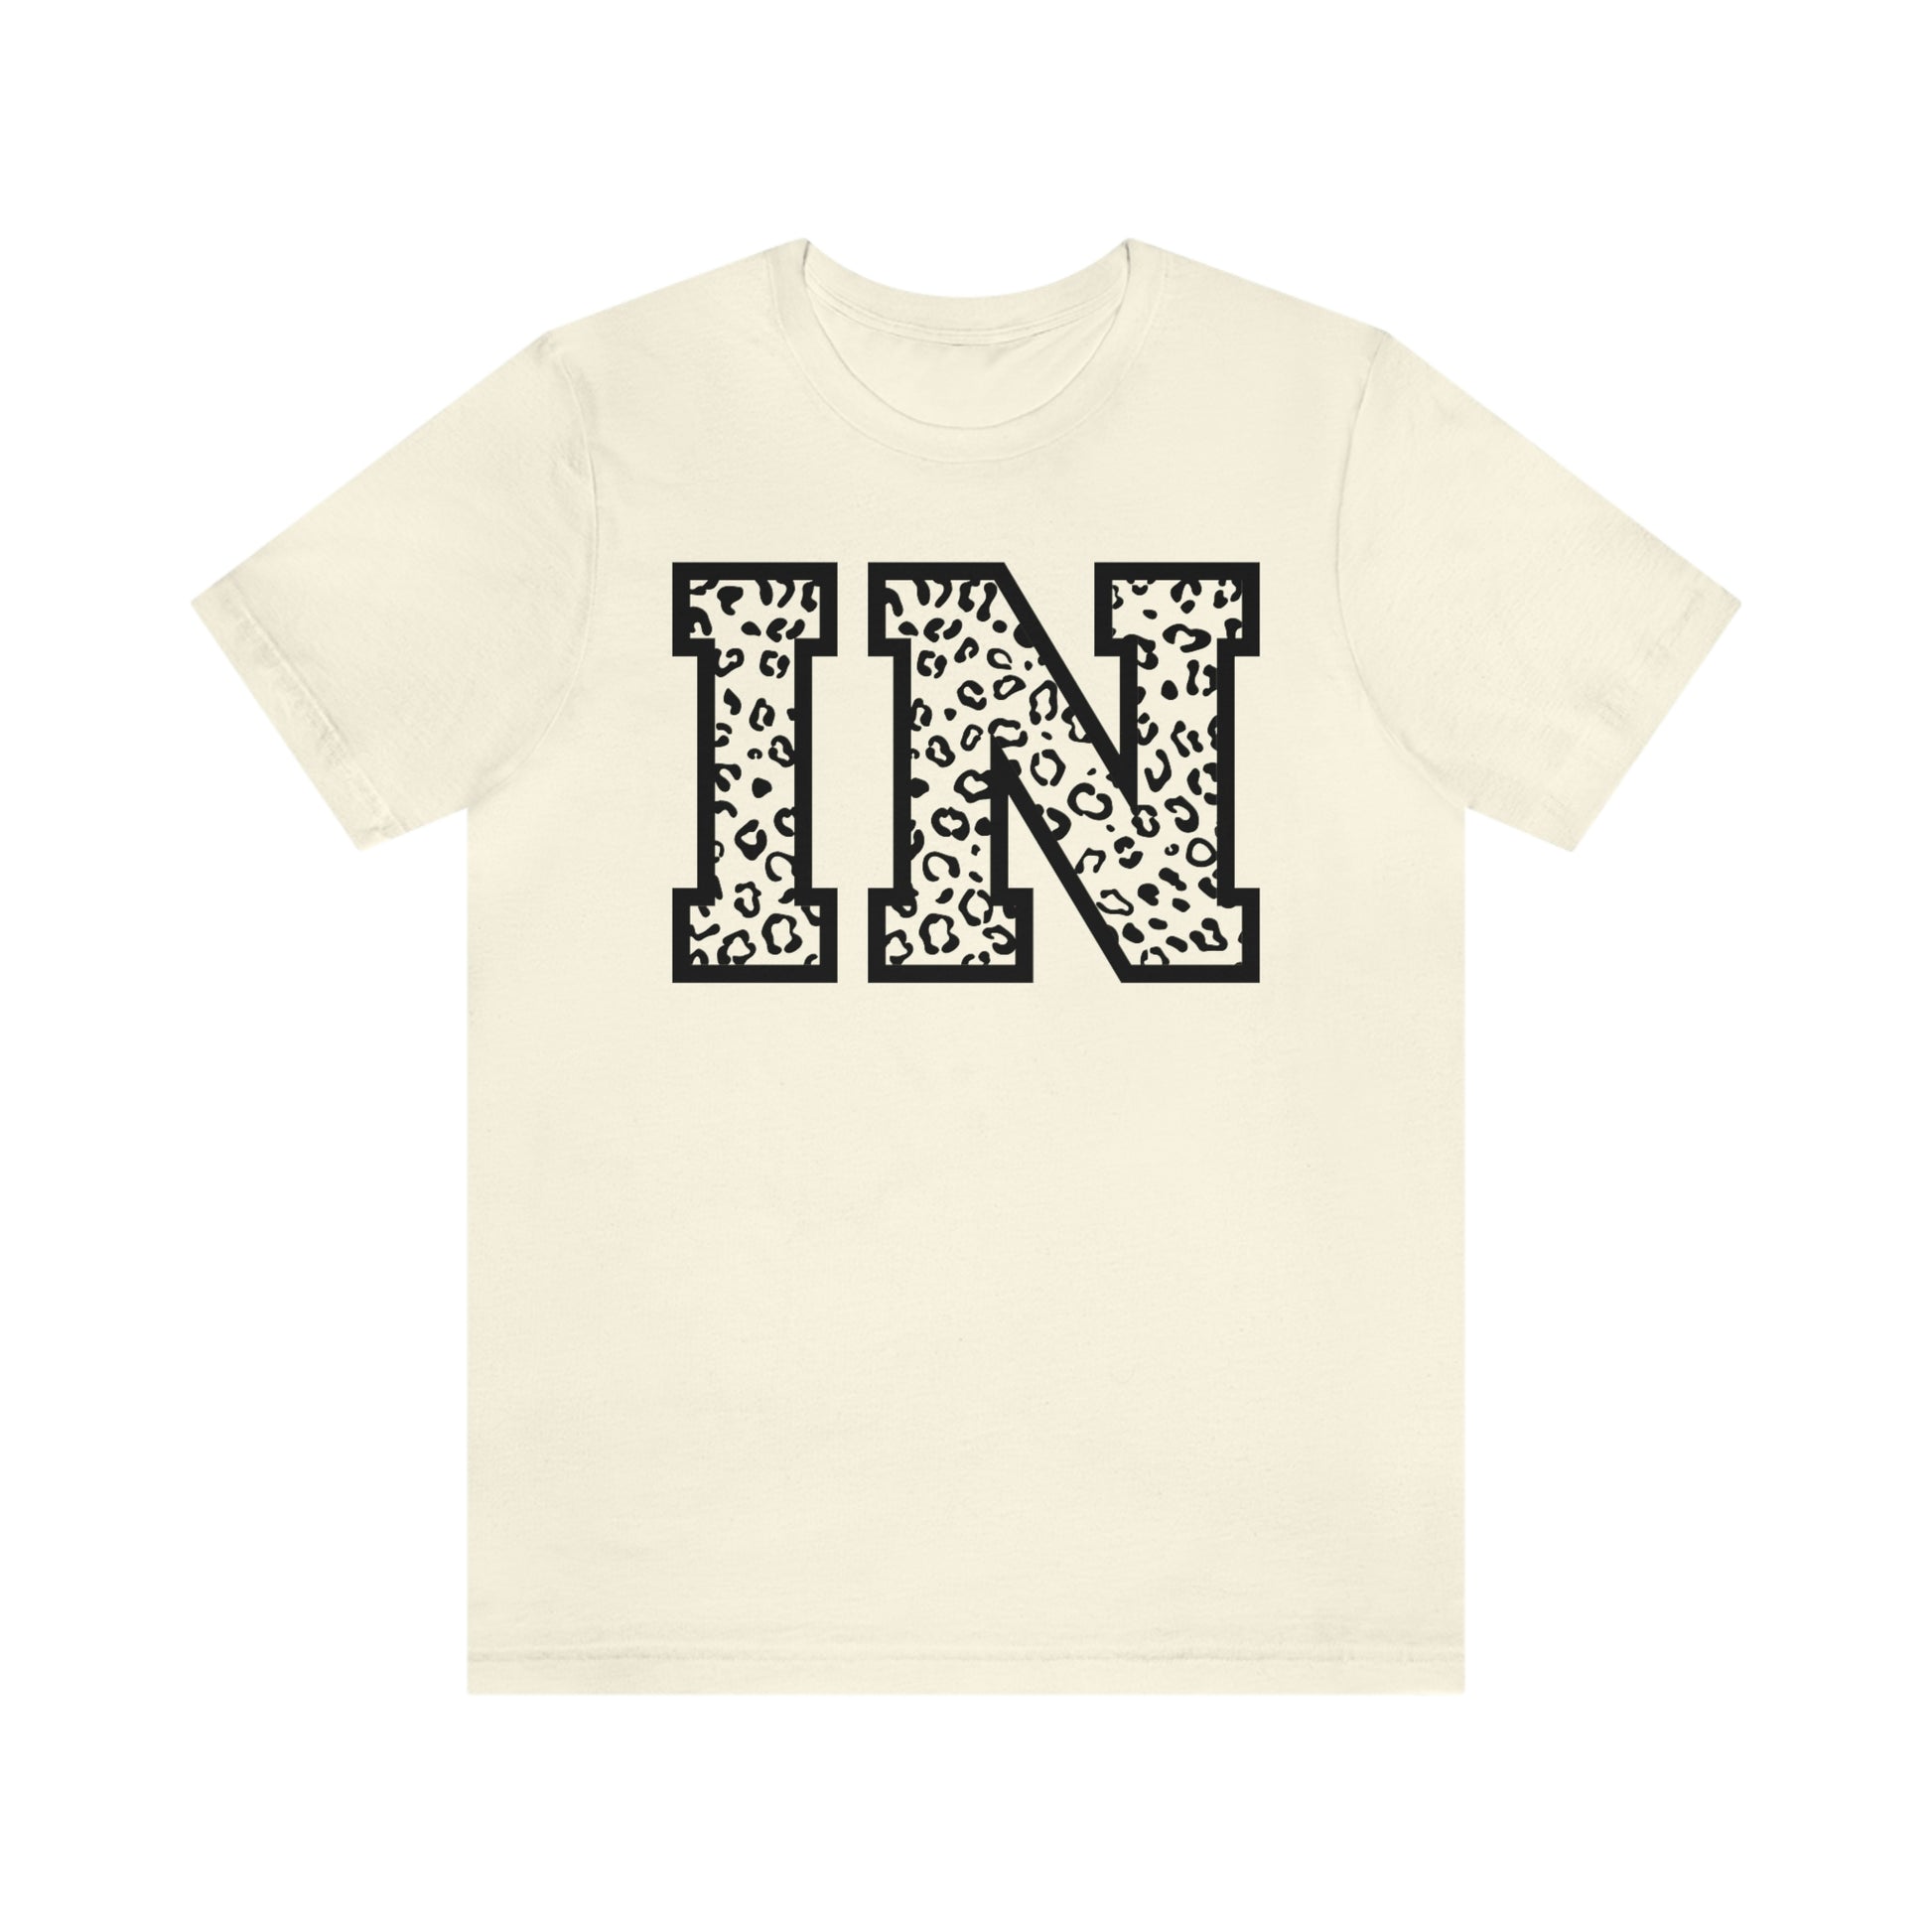 Indiana IN Leopard Print Letters Short Sleeve T-shirt